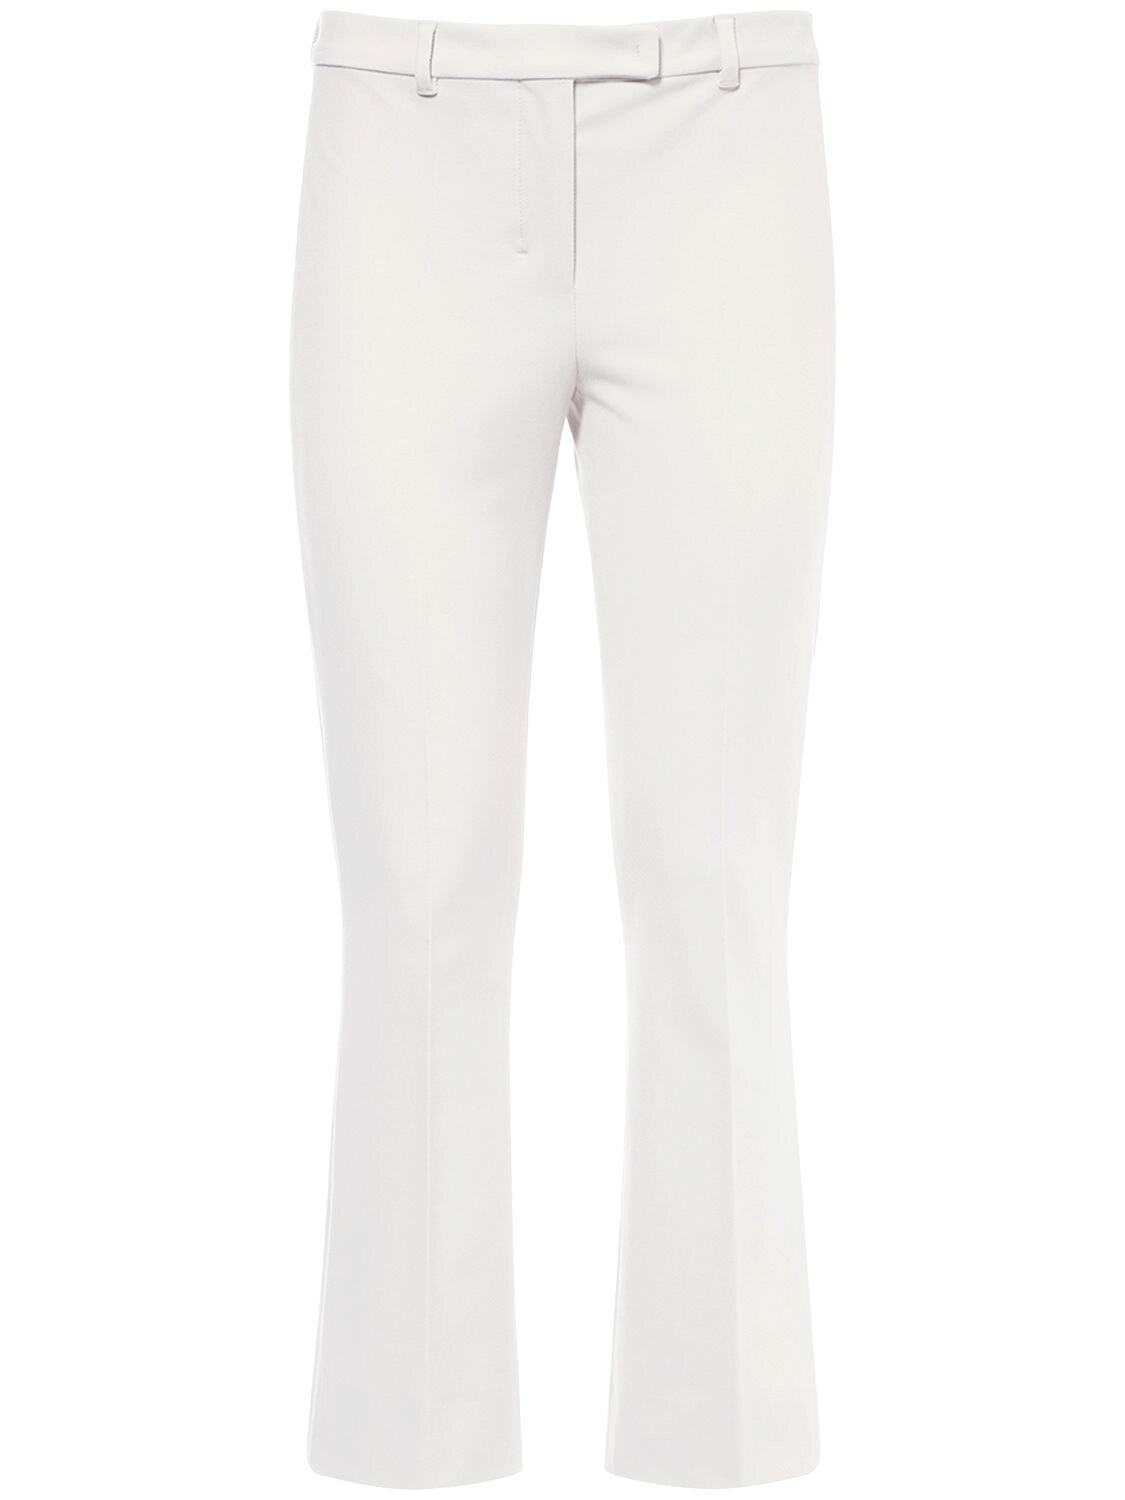 's Max Mara Cropped Stretch Cotton Twill Trousers In Light Grey